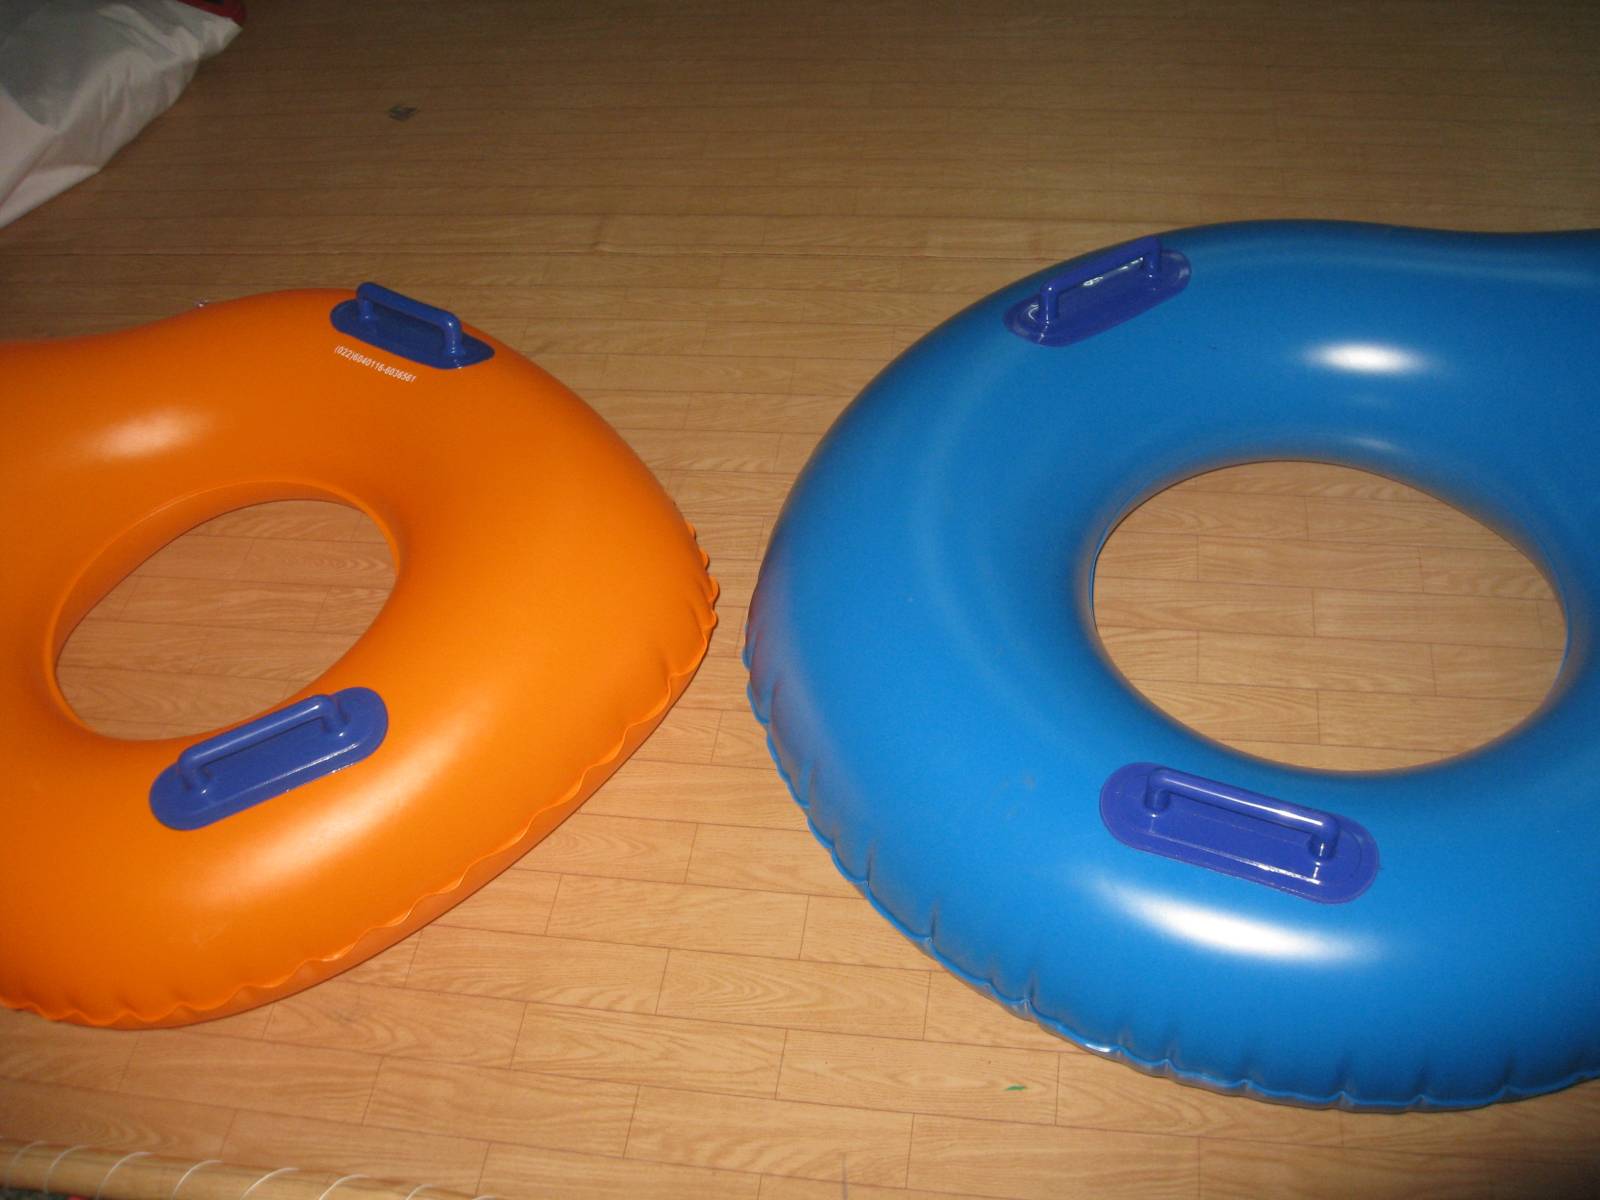 Customised 120CM Dia Inflatable Wheel Ring With 2 Handles Without Inner Ring For Beach,Pool Funning